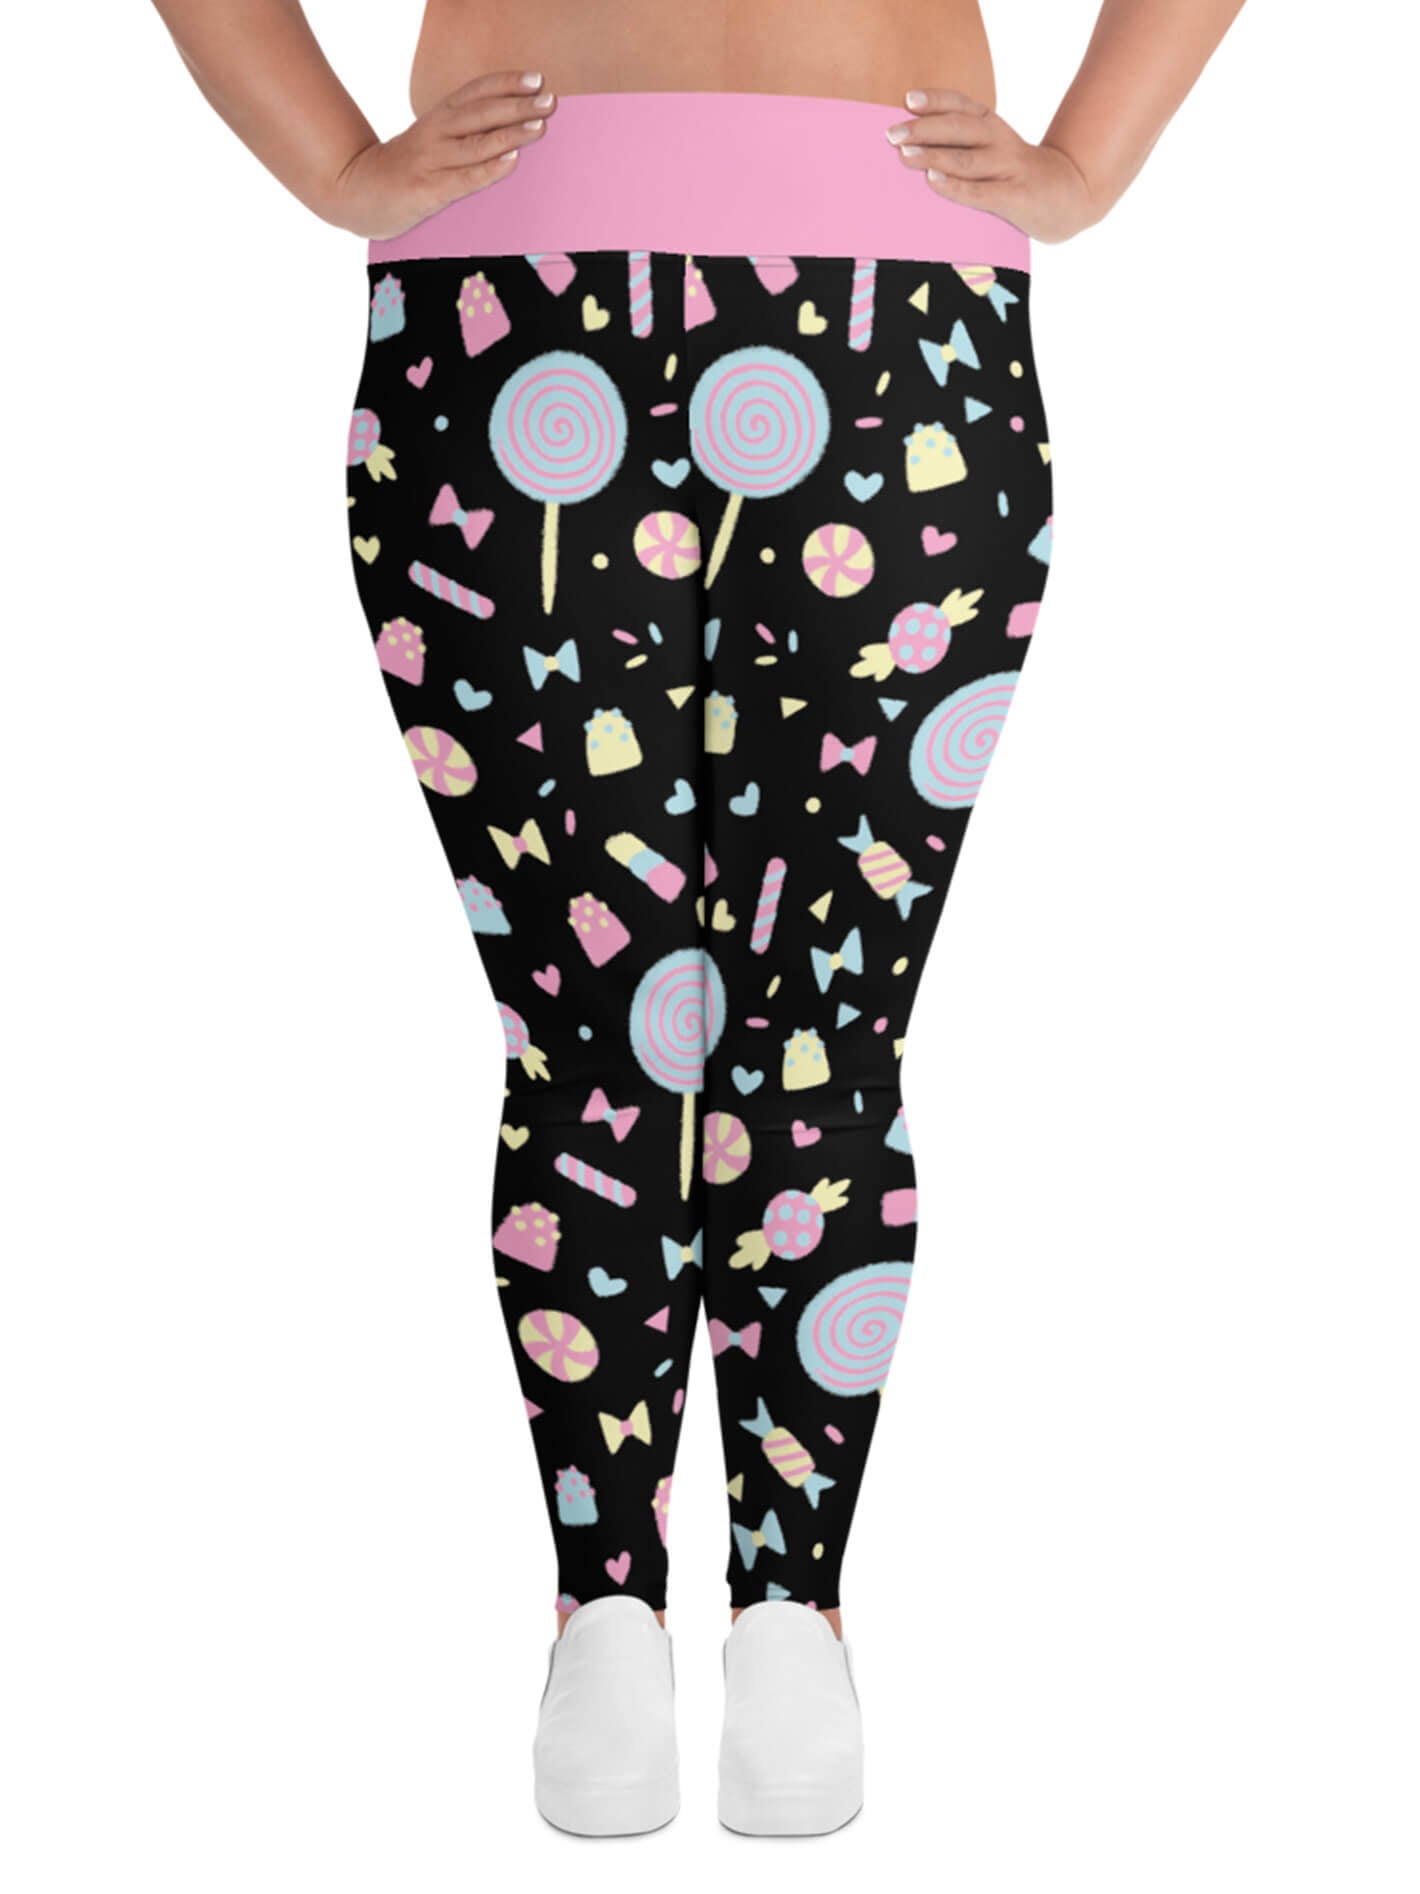 Pastelcore plus size candy leggings.